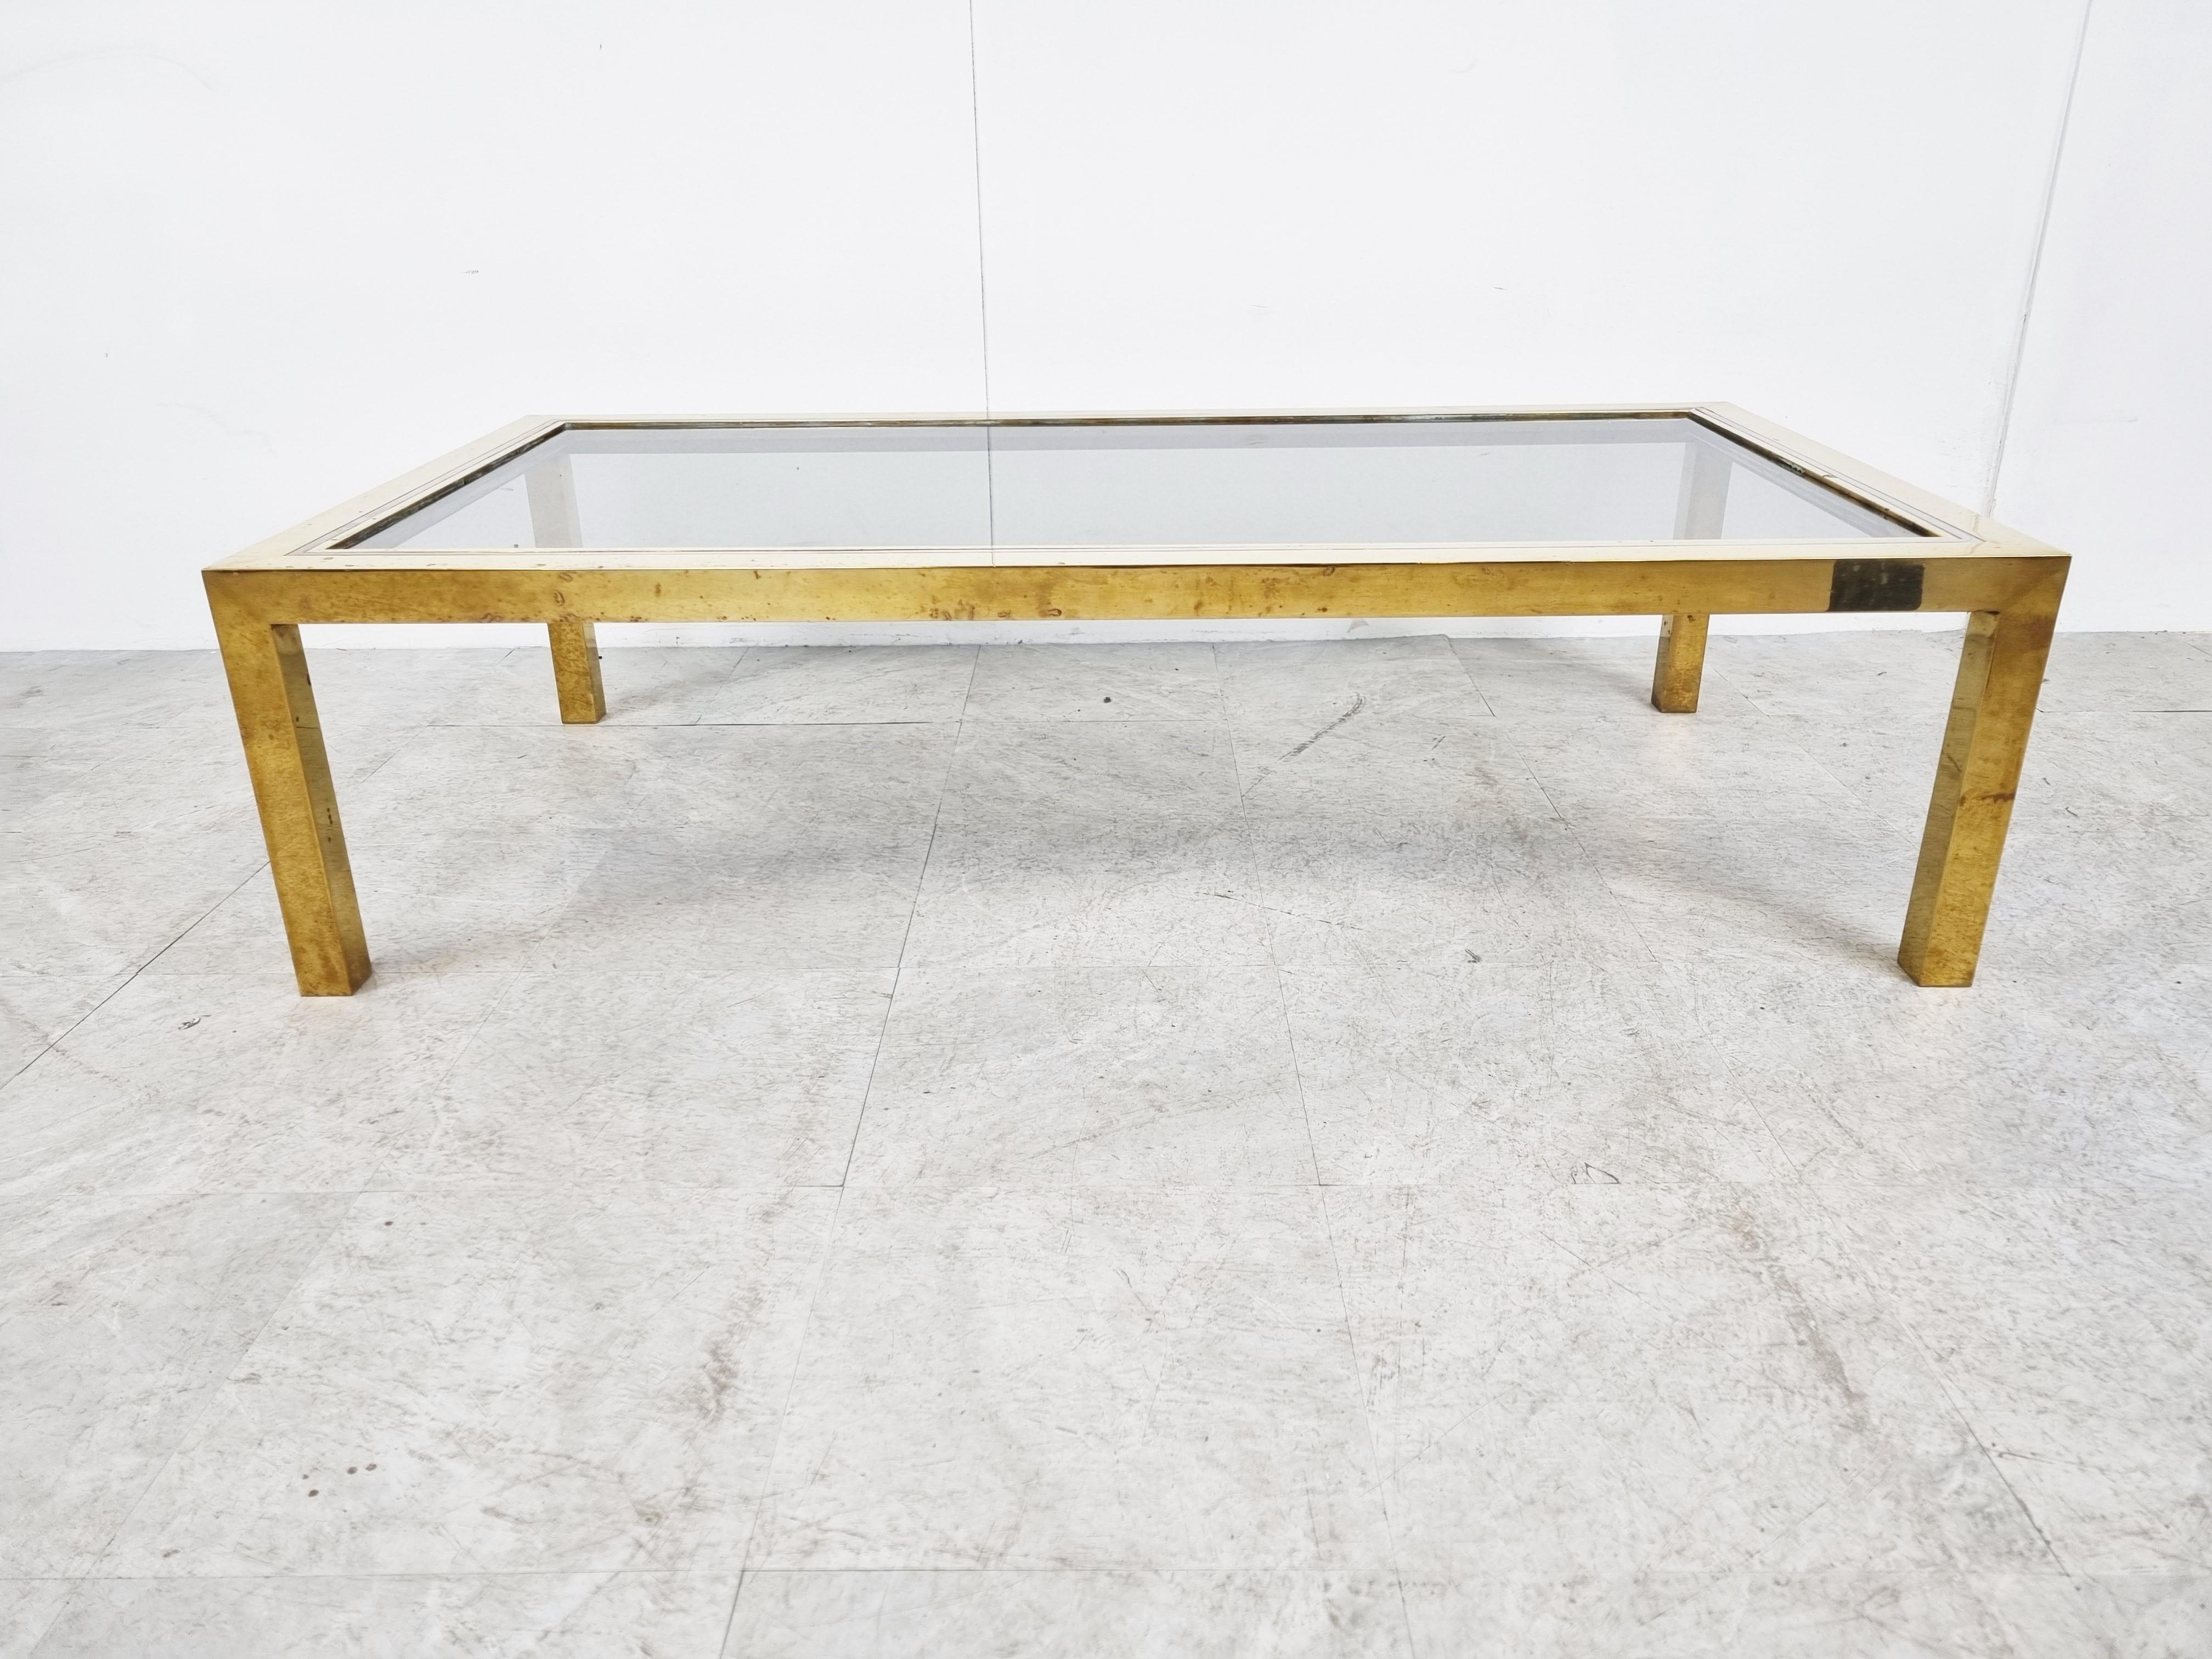 Brass and chrome coffee table with a smoked glass top in the style of Willy Rizzo or Romeo Rega

Hollywood regency style.

Condition: Patina on the brass/chrome, smoked glass top in very good condition.

1970s - italy

Dimensions:
Height: